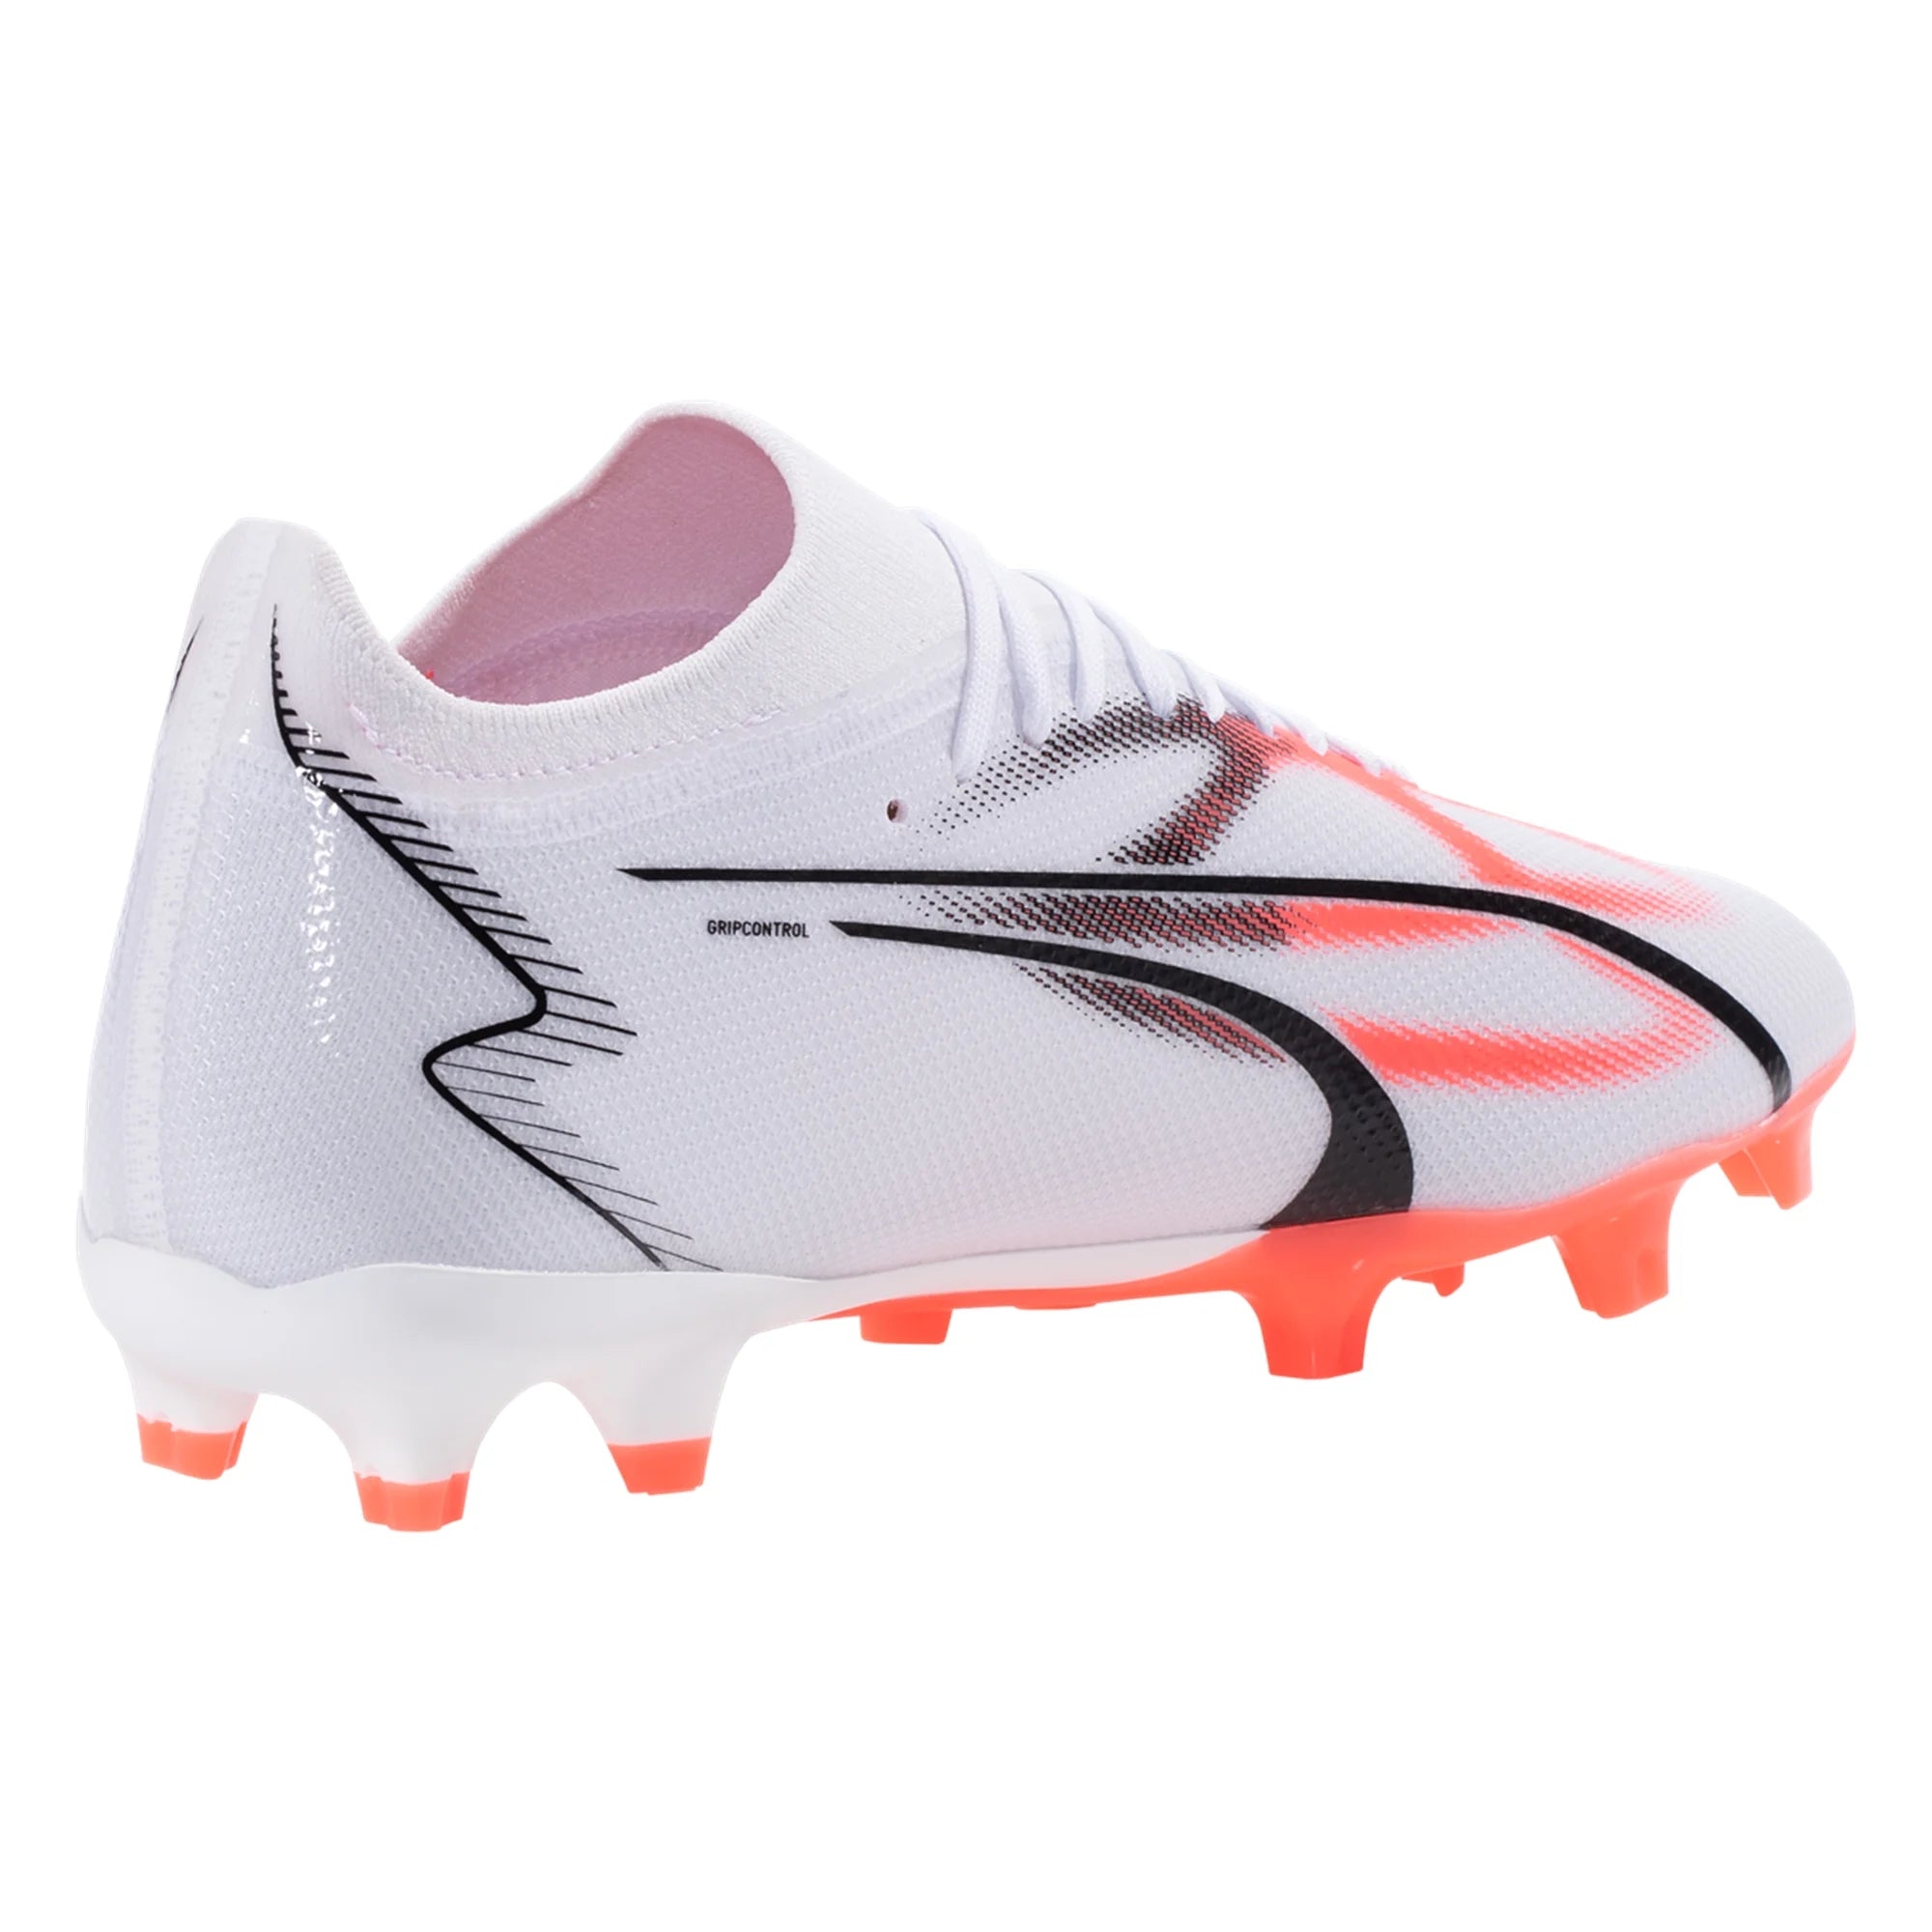 Soccer USA FG/AG – Cleat Ground 107347-01 Puma Match - Ultra Firm Soccer White/Black/Fire Orchid Zone